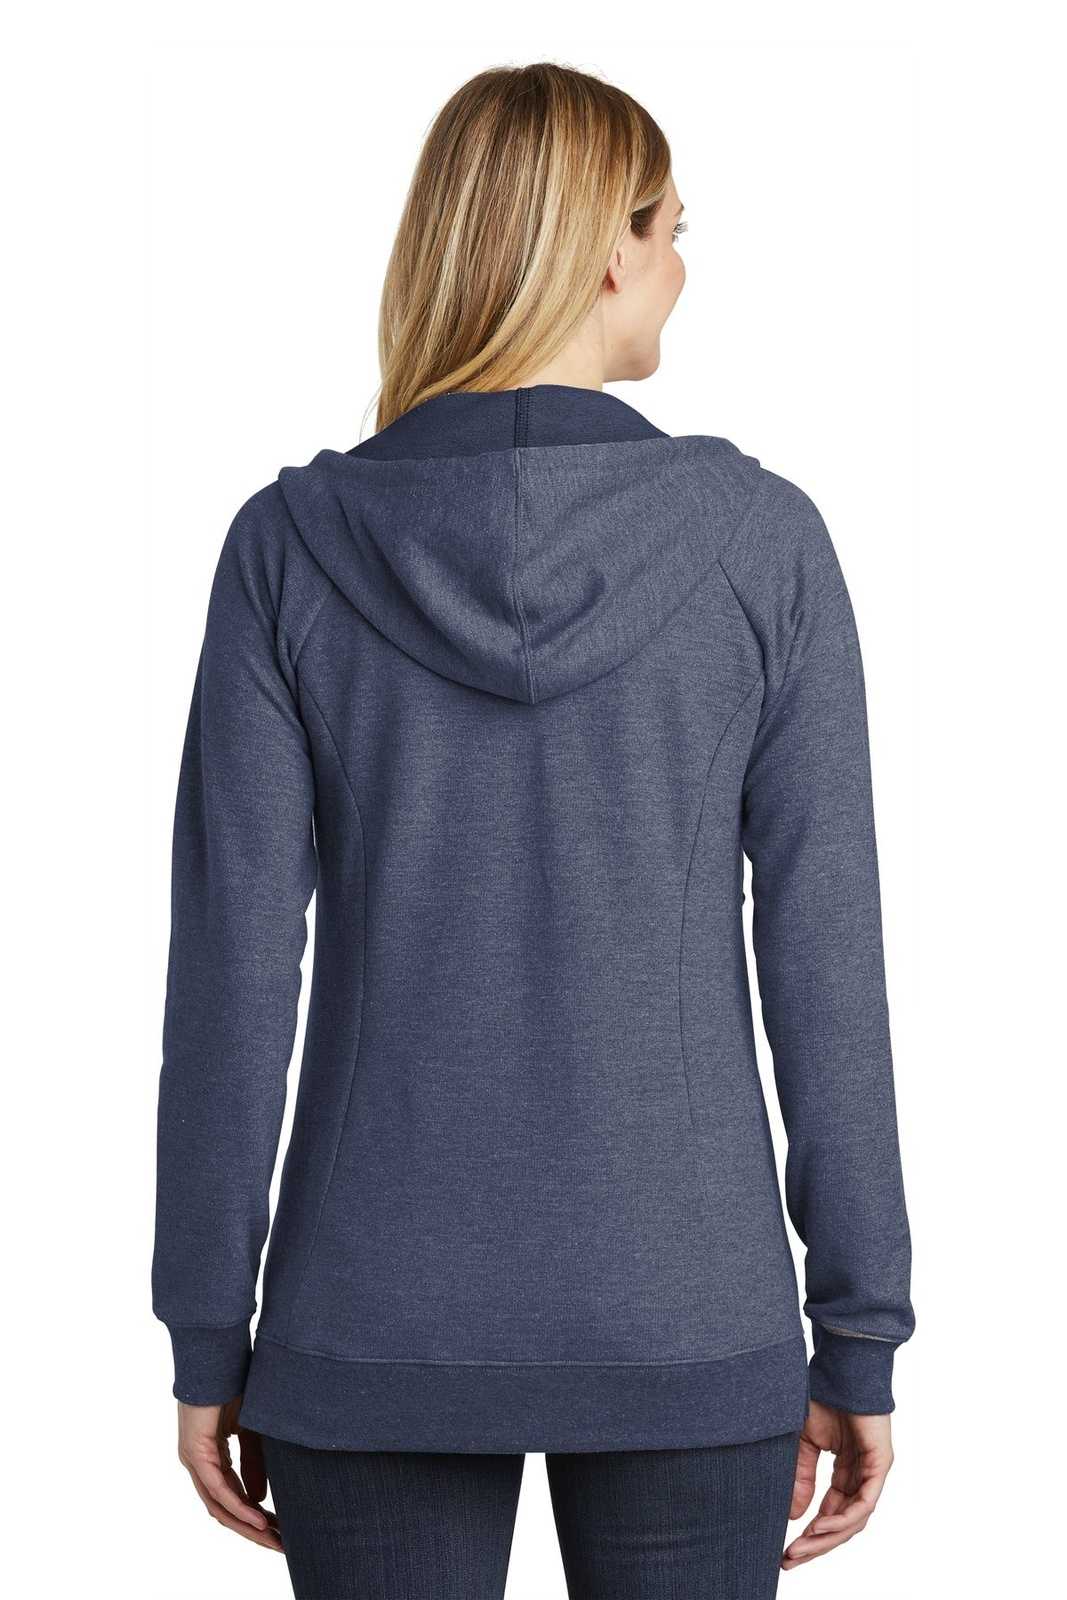 District DT456 Women's Perfect Tri French Terry Full-Zip Hoodie - New Navy - HIT a Double - 1